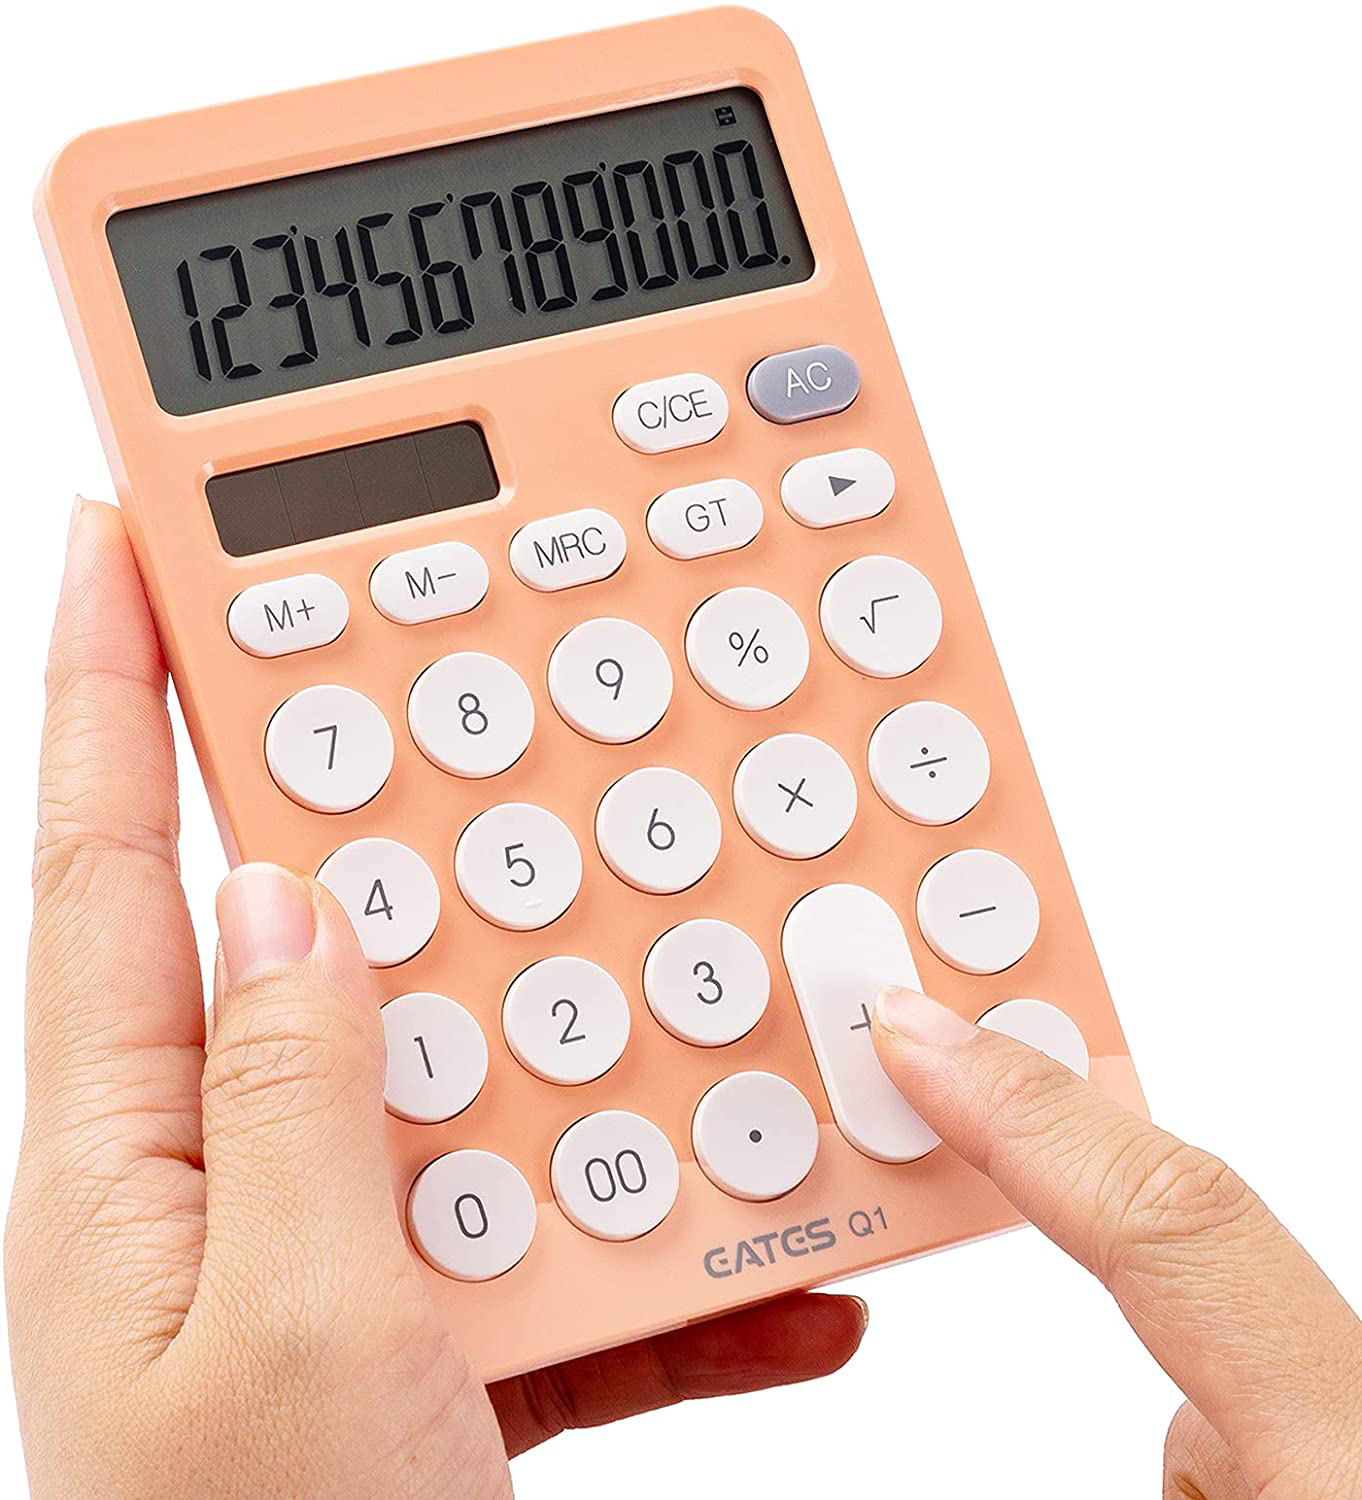 JAWOO Desk Calculator, 12 Digit Desktop Basic Jumbo Adding Machine Accounting Simple Calculators with Large Display Big Button, Solar and Battery Dual Power for Office, Home, School (DS-200ml)